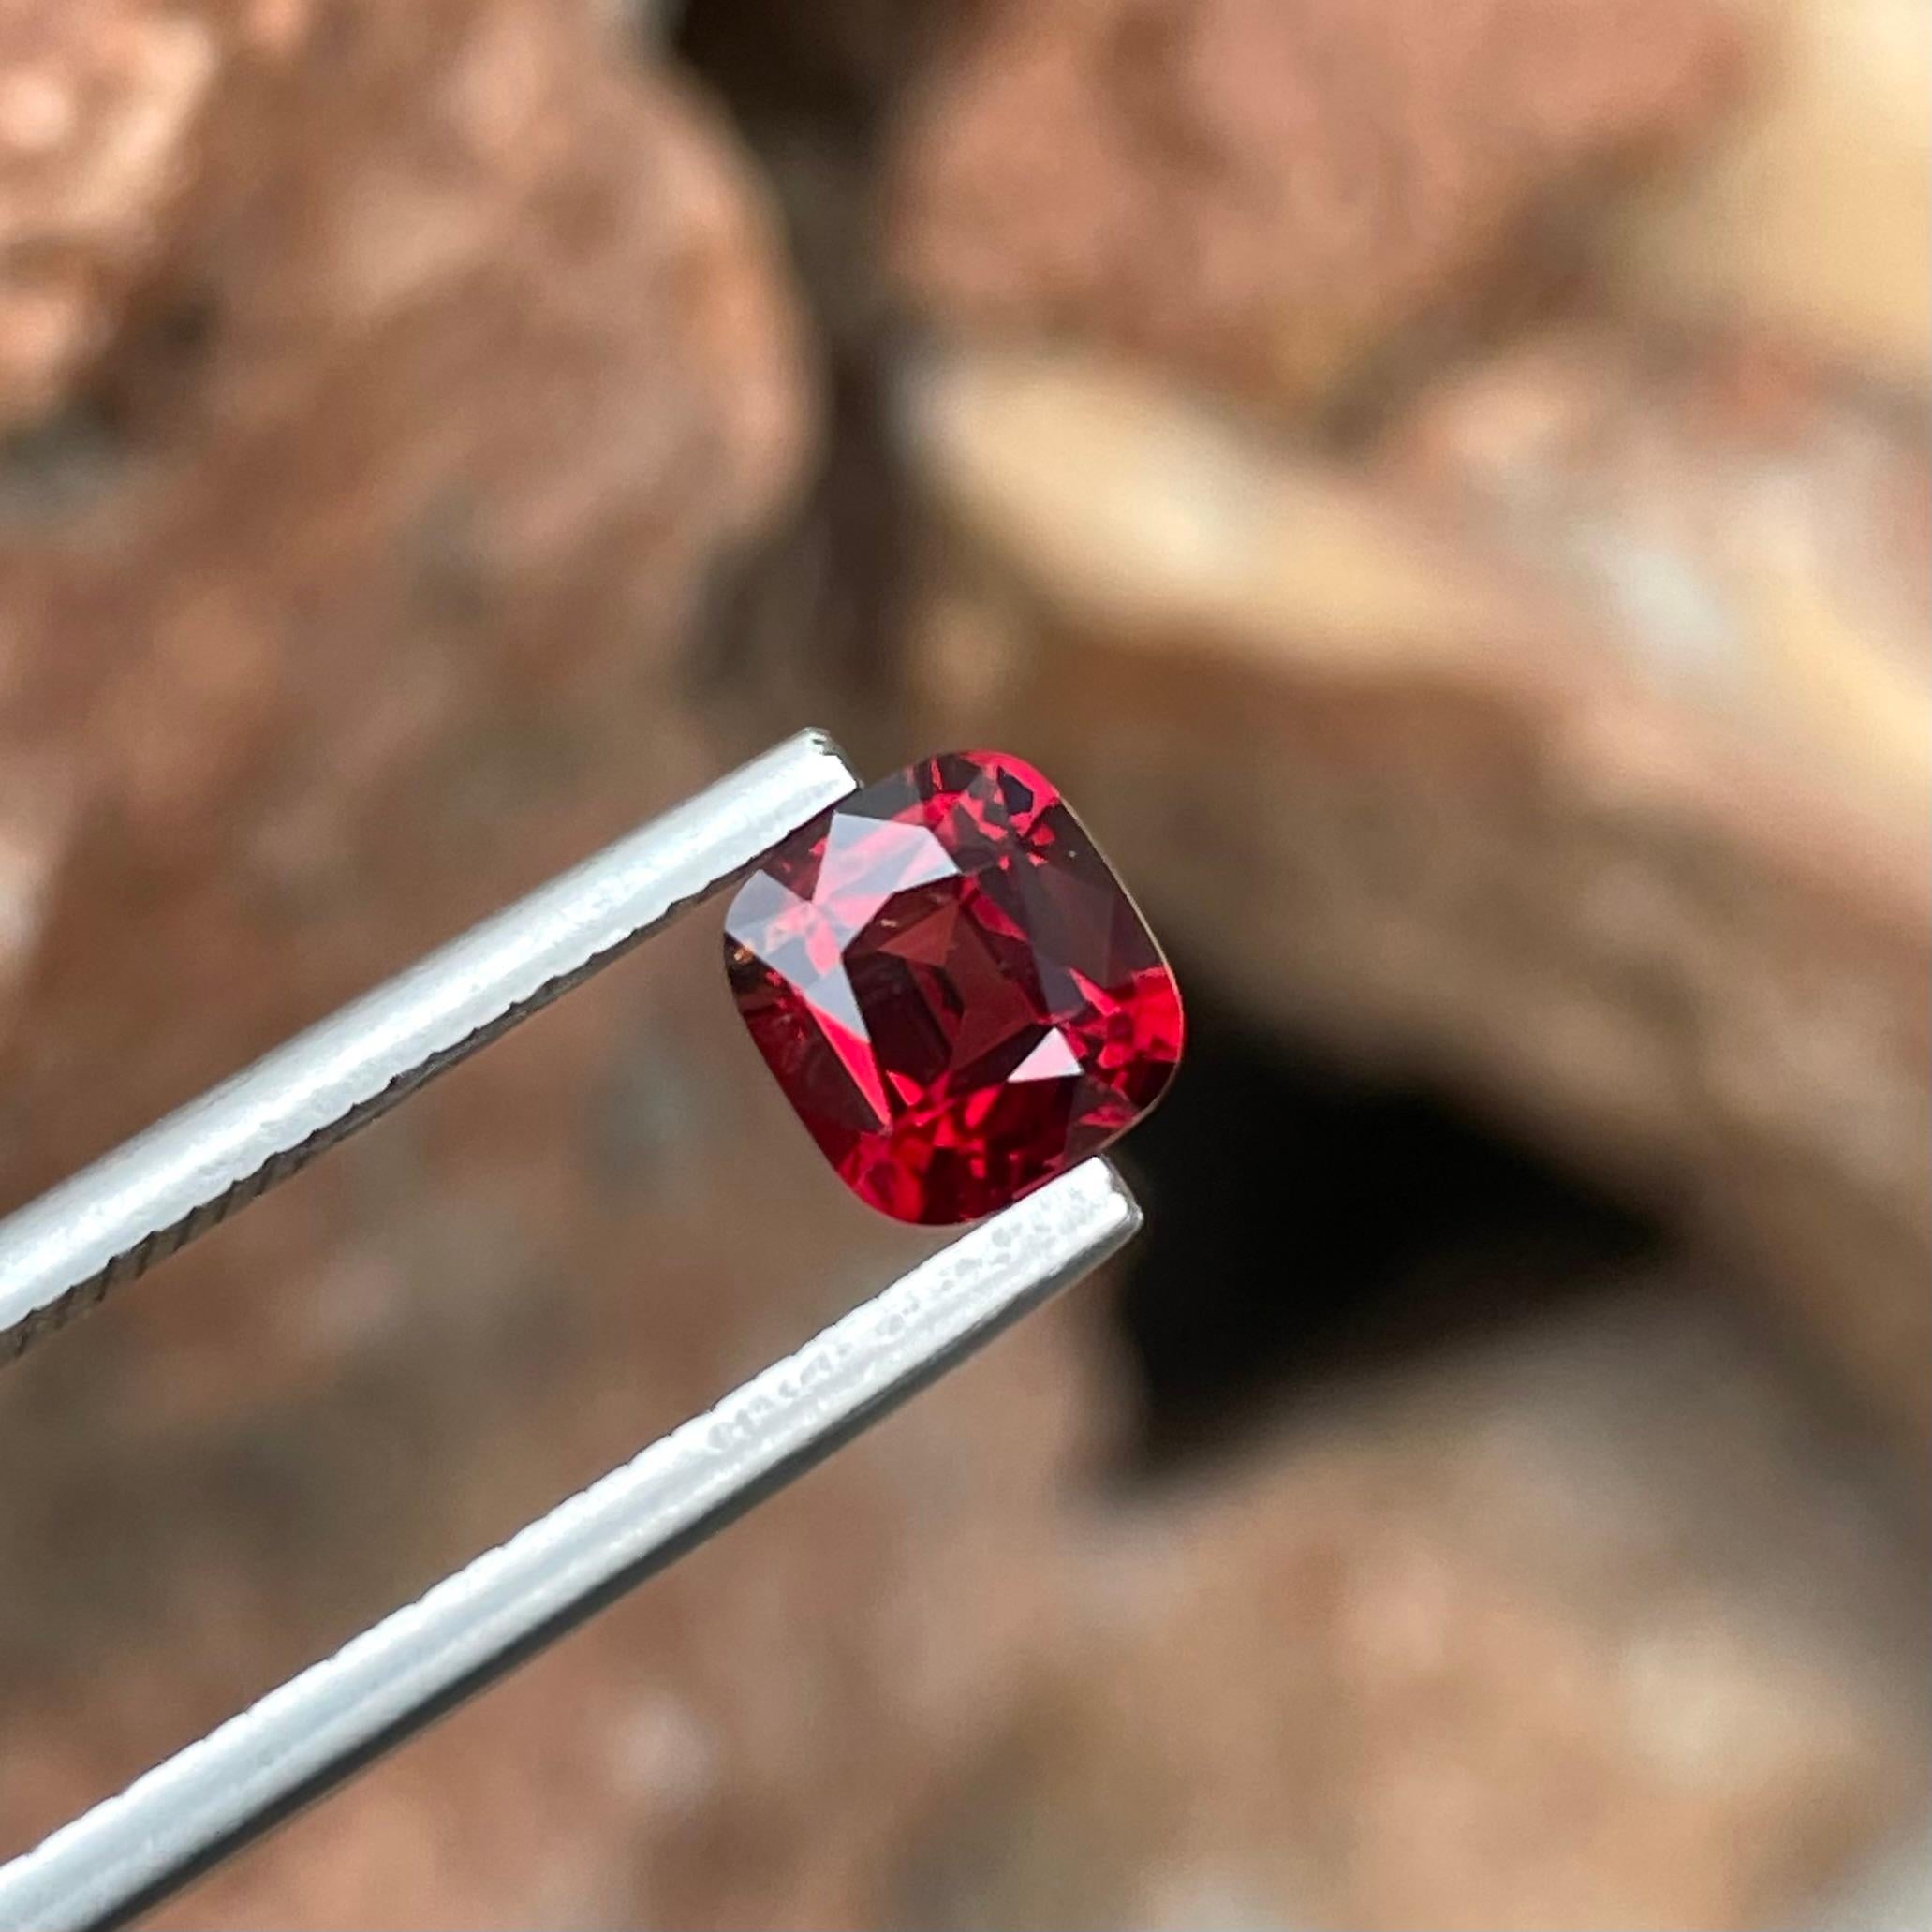 Weight 1.35 carats 
Dimensions 6.75x6.22x3.92 mm
Treatment none 
Origin Burma 
Clarity VVS
Shape cushion 
Cut fancy cushion 




Behold the allure of this exquisite 1.35 carats Red Burmese Spinel, a gemstone of unparalleled beauty and rarity.